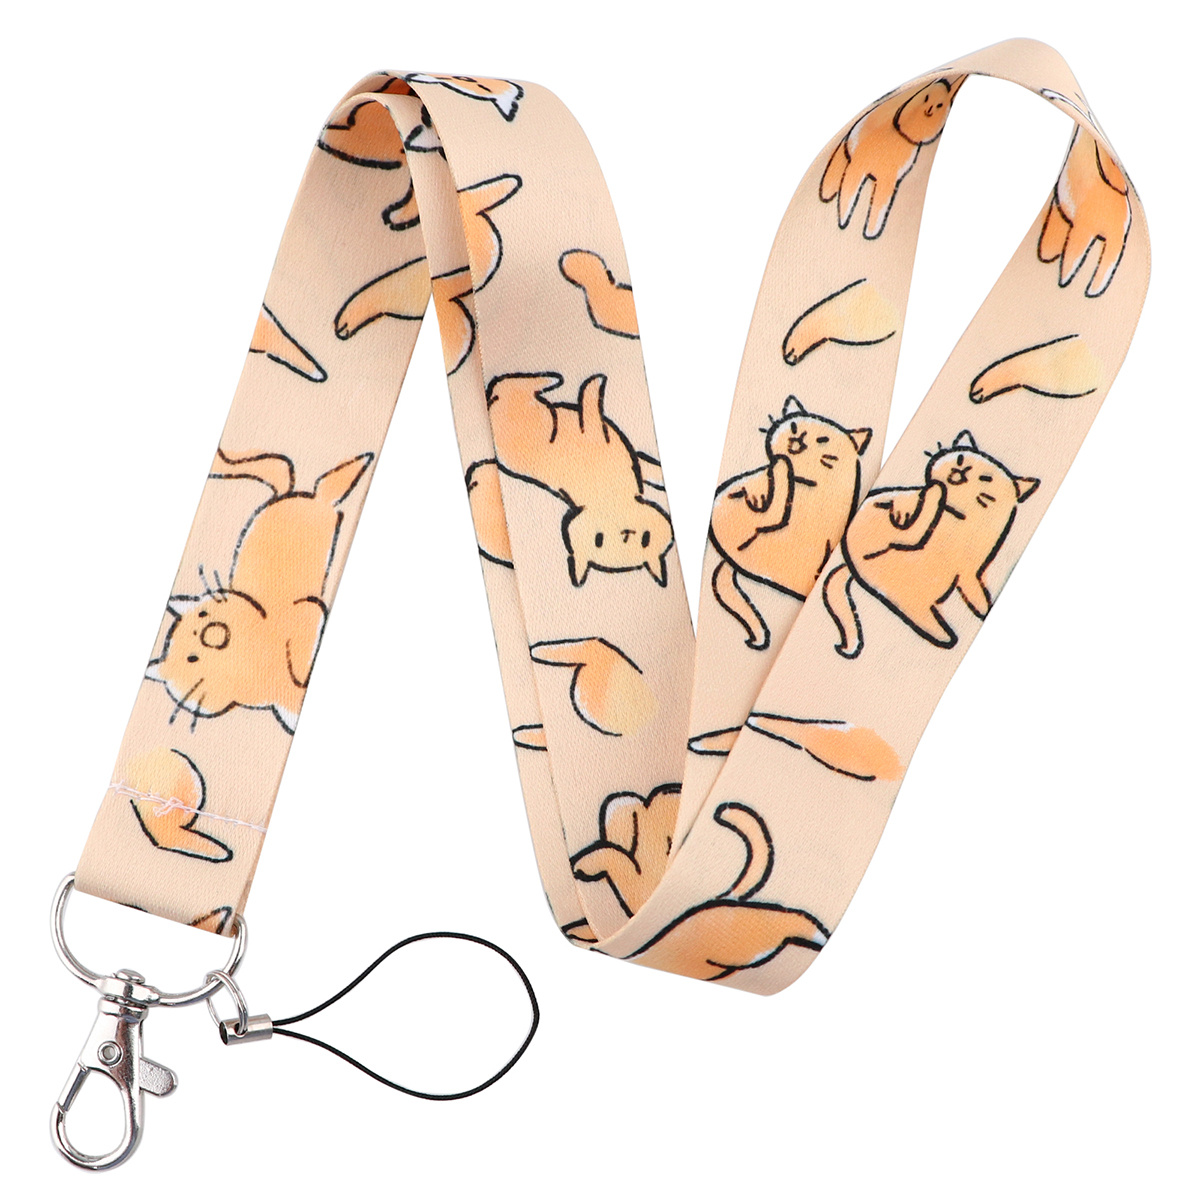 Cats and Dogs Print Neck Strap Lanyard, Keys Keychain Wallet ID Card Holder, Fashionable Wear Decorative Wrist Strap, Christmas Gifts,Mobile Phone